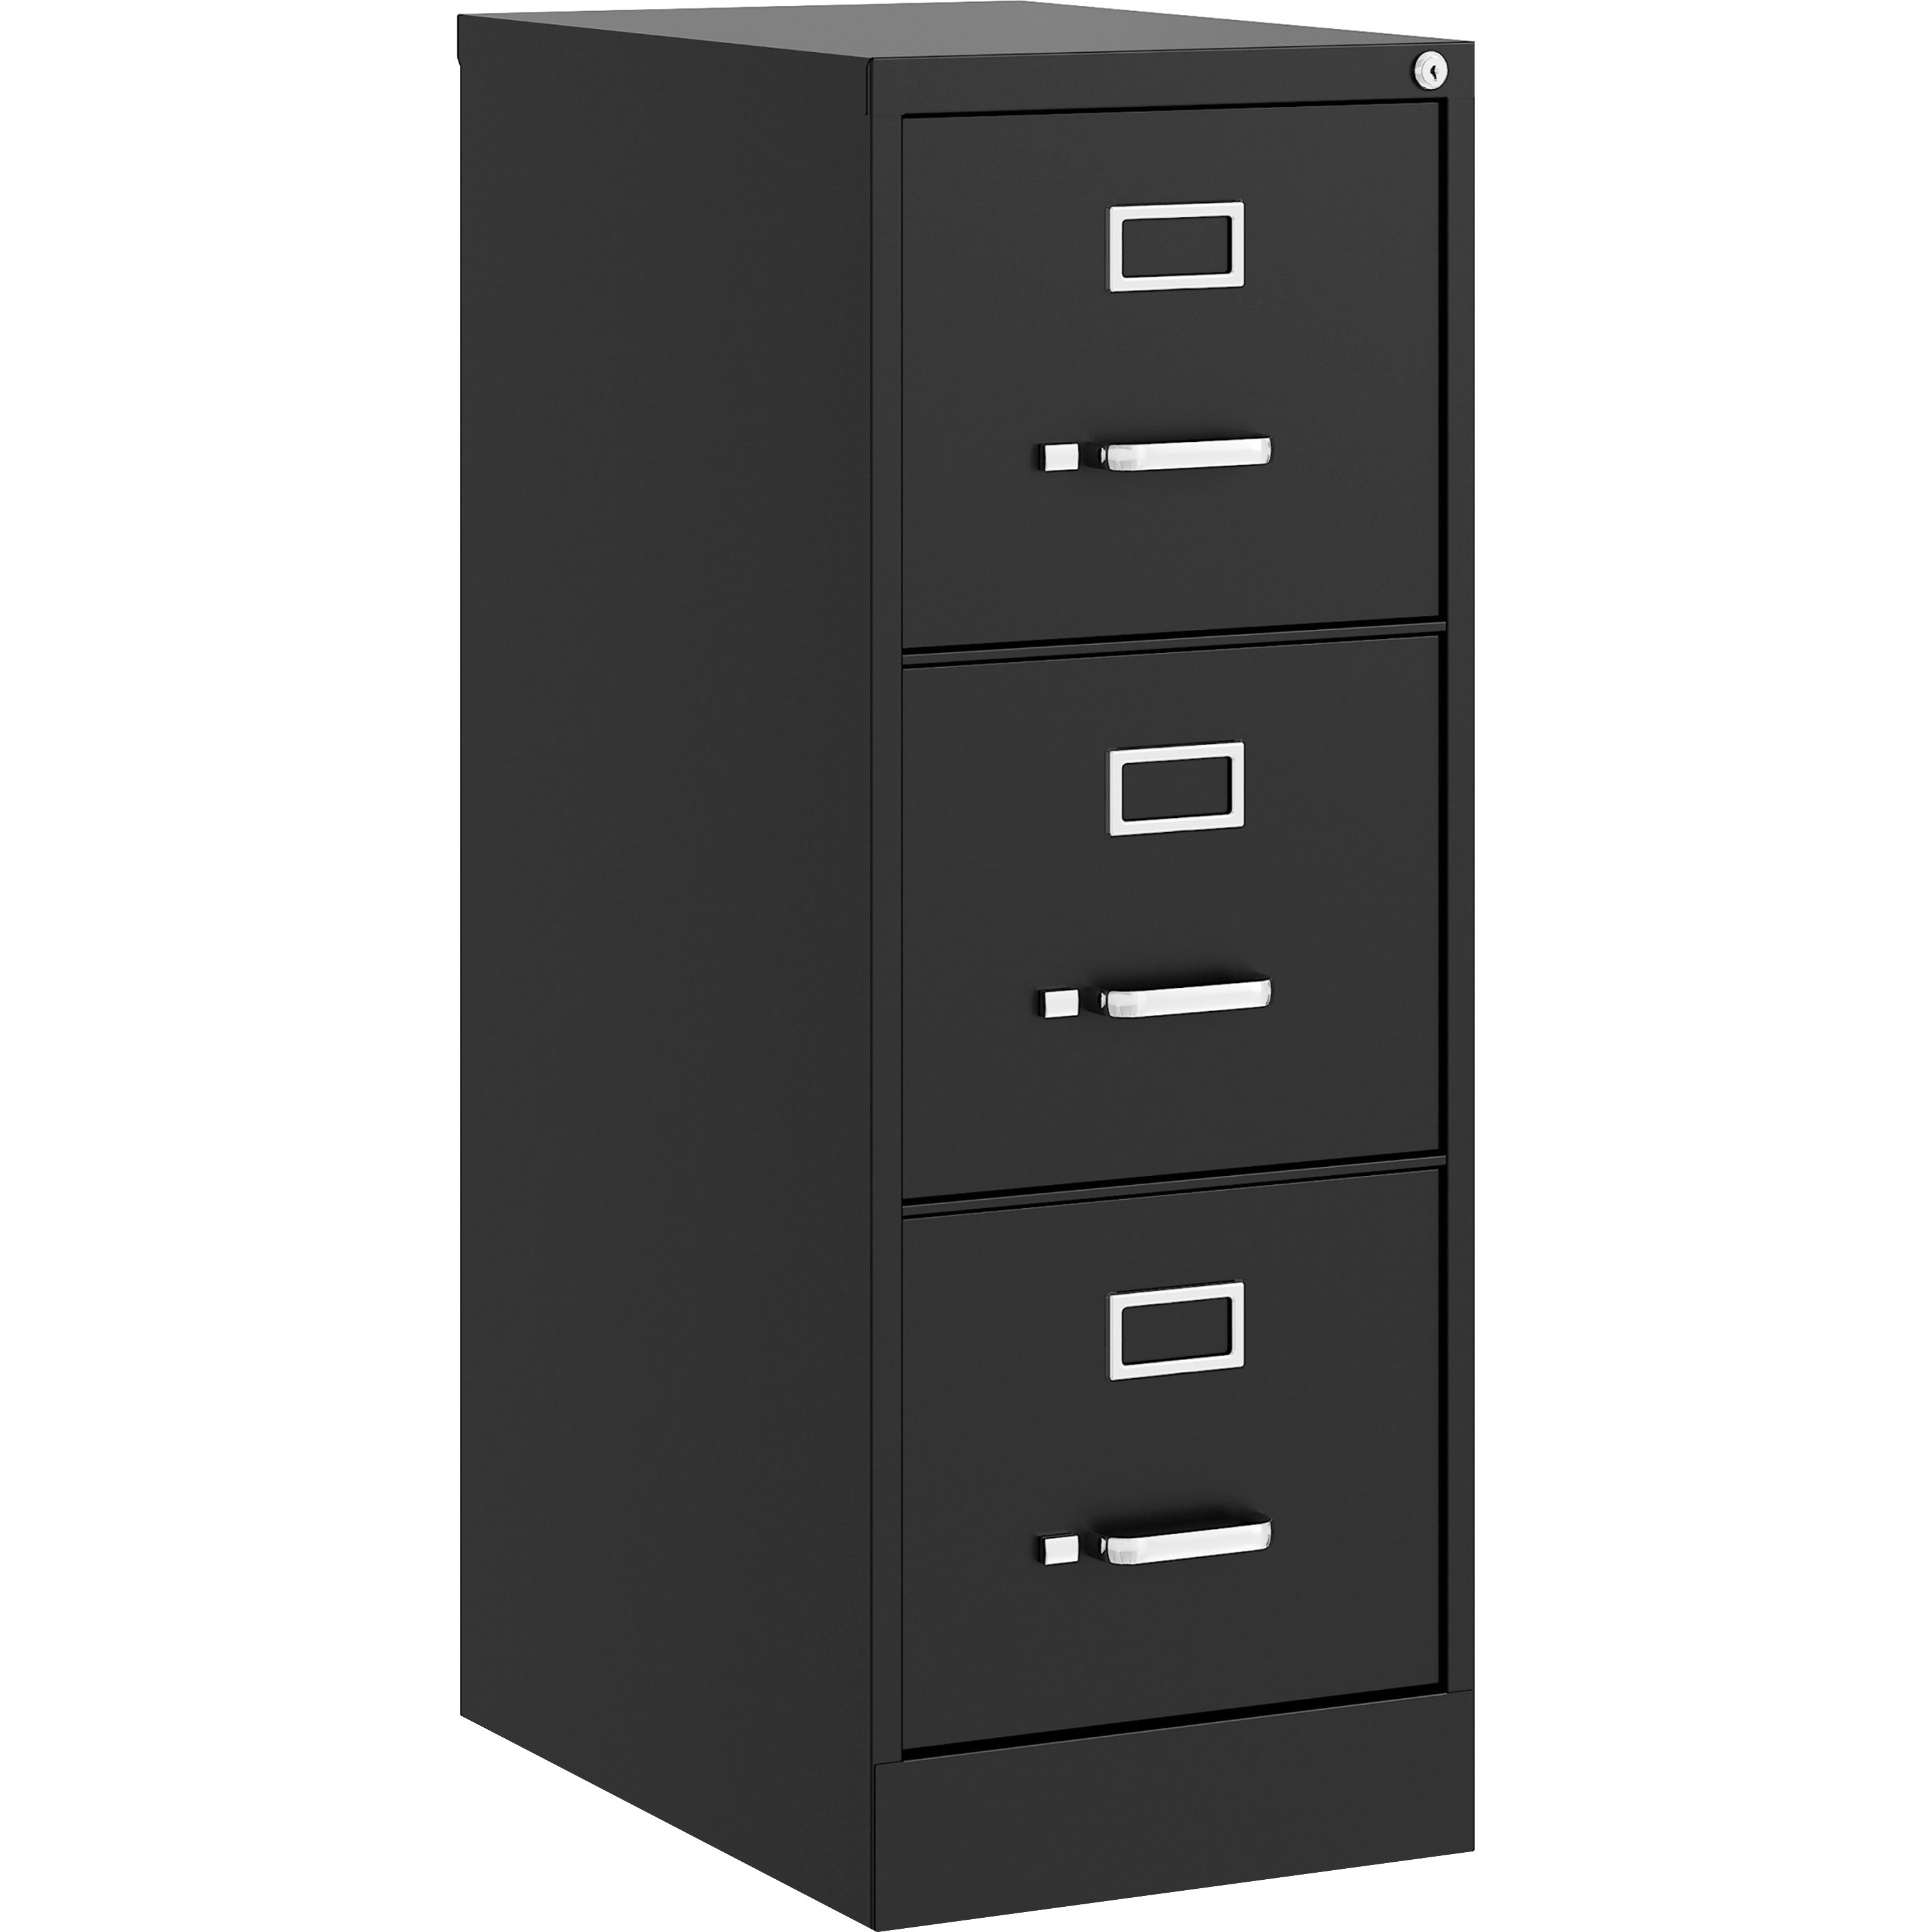 lorell-fortress-series-22-commercial-grade-vertical-file-cabinet-15-x-22-x-402-3-x-drawers-for-file-letter-vertical-ball-bearing-suspension-removable-lock-pull-handle-wire-management-black-steel-recycled_llr42297 - 1